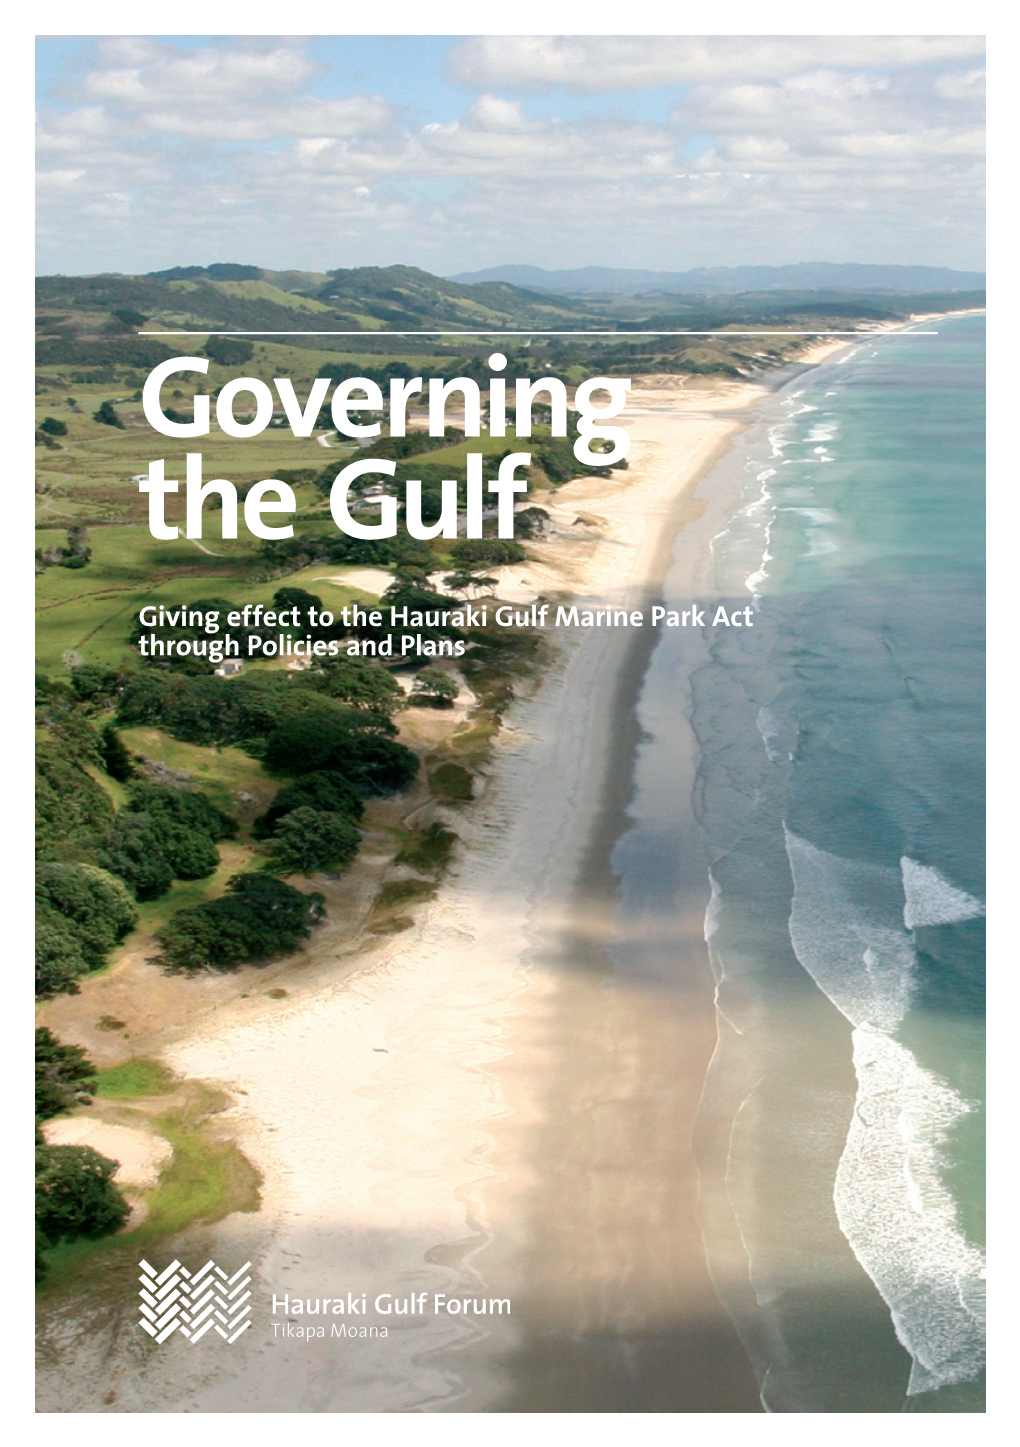 Governing the Gulf Giving Effect to the Hauraki Gulf Marine Park Act Through Policies and Plans